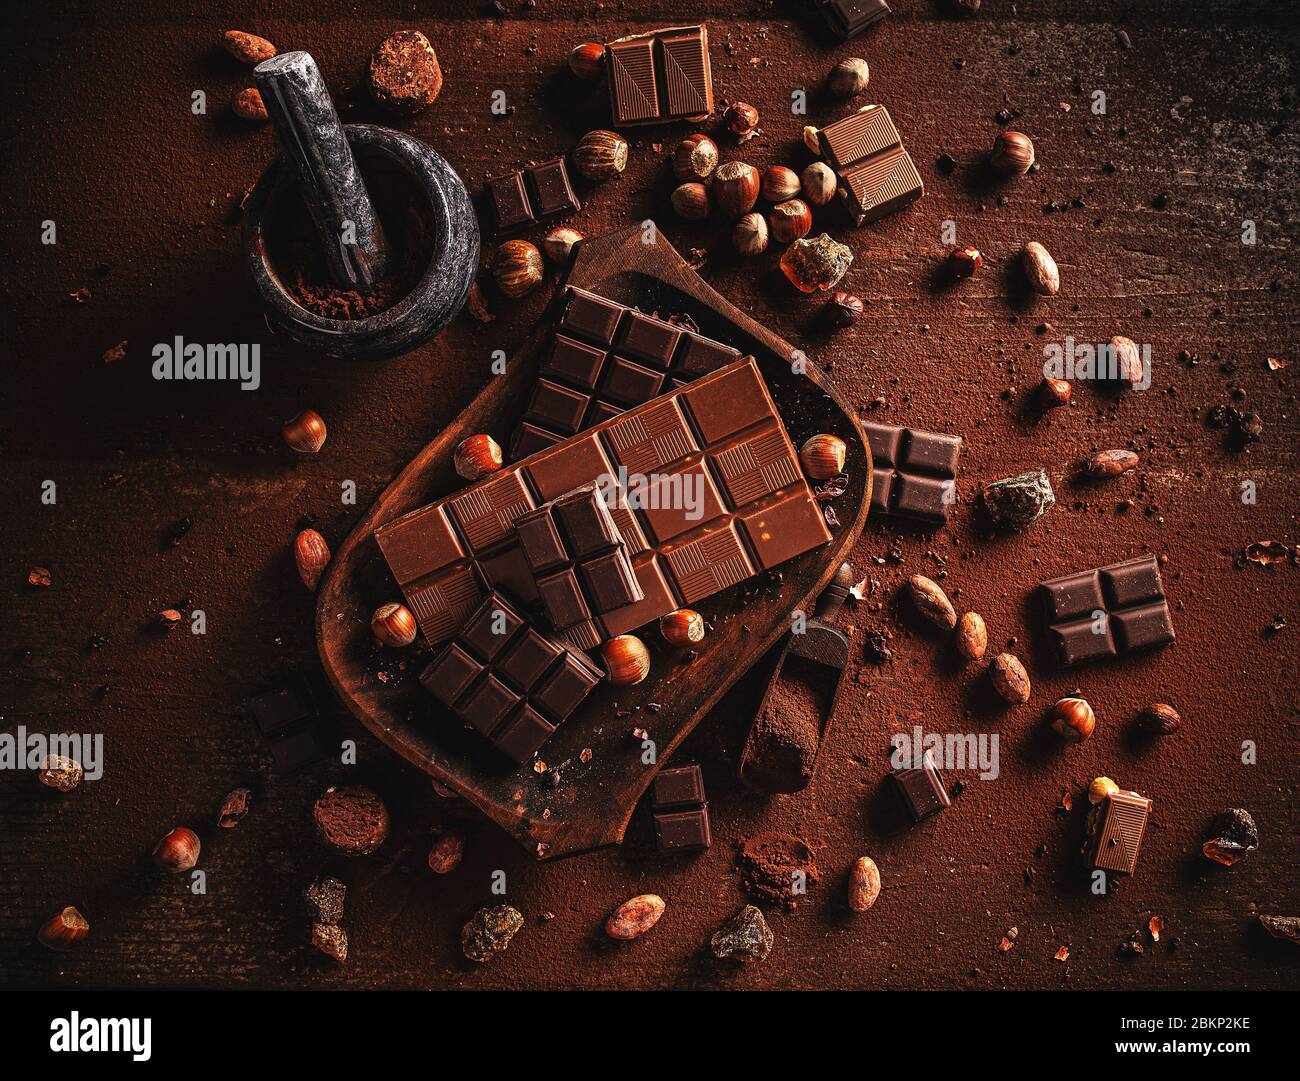 Cocoa powder, beans and chocolate bar pieces on dark wooden background. Stock Photo